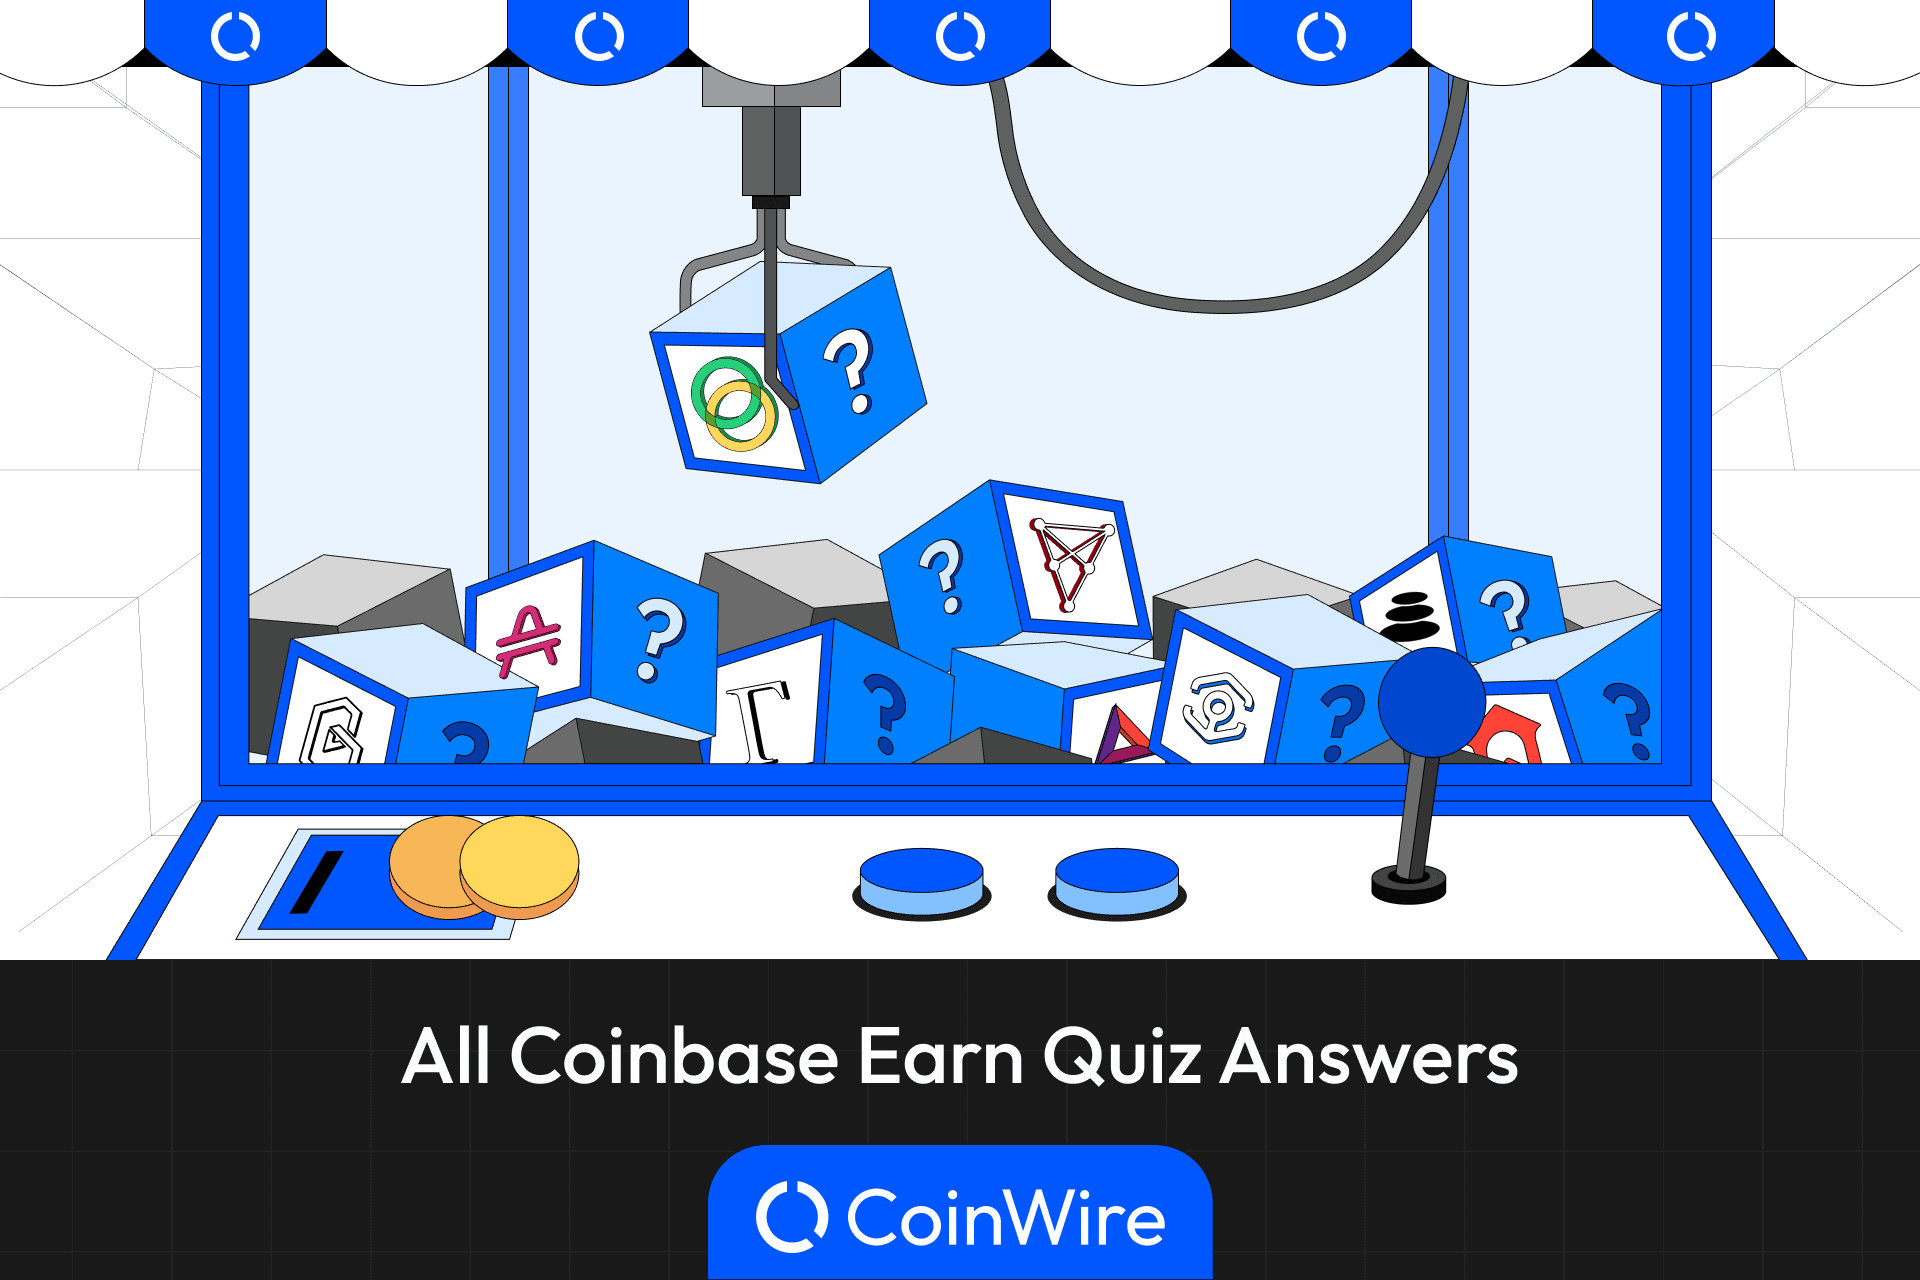 Earn Crypto While Learning About Crypto - Coinbase Quiz Answers